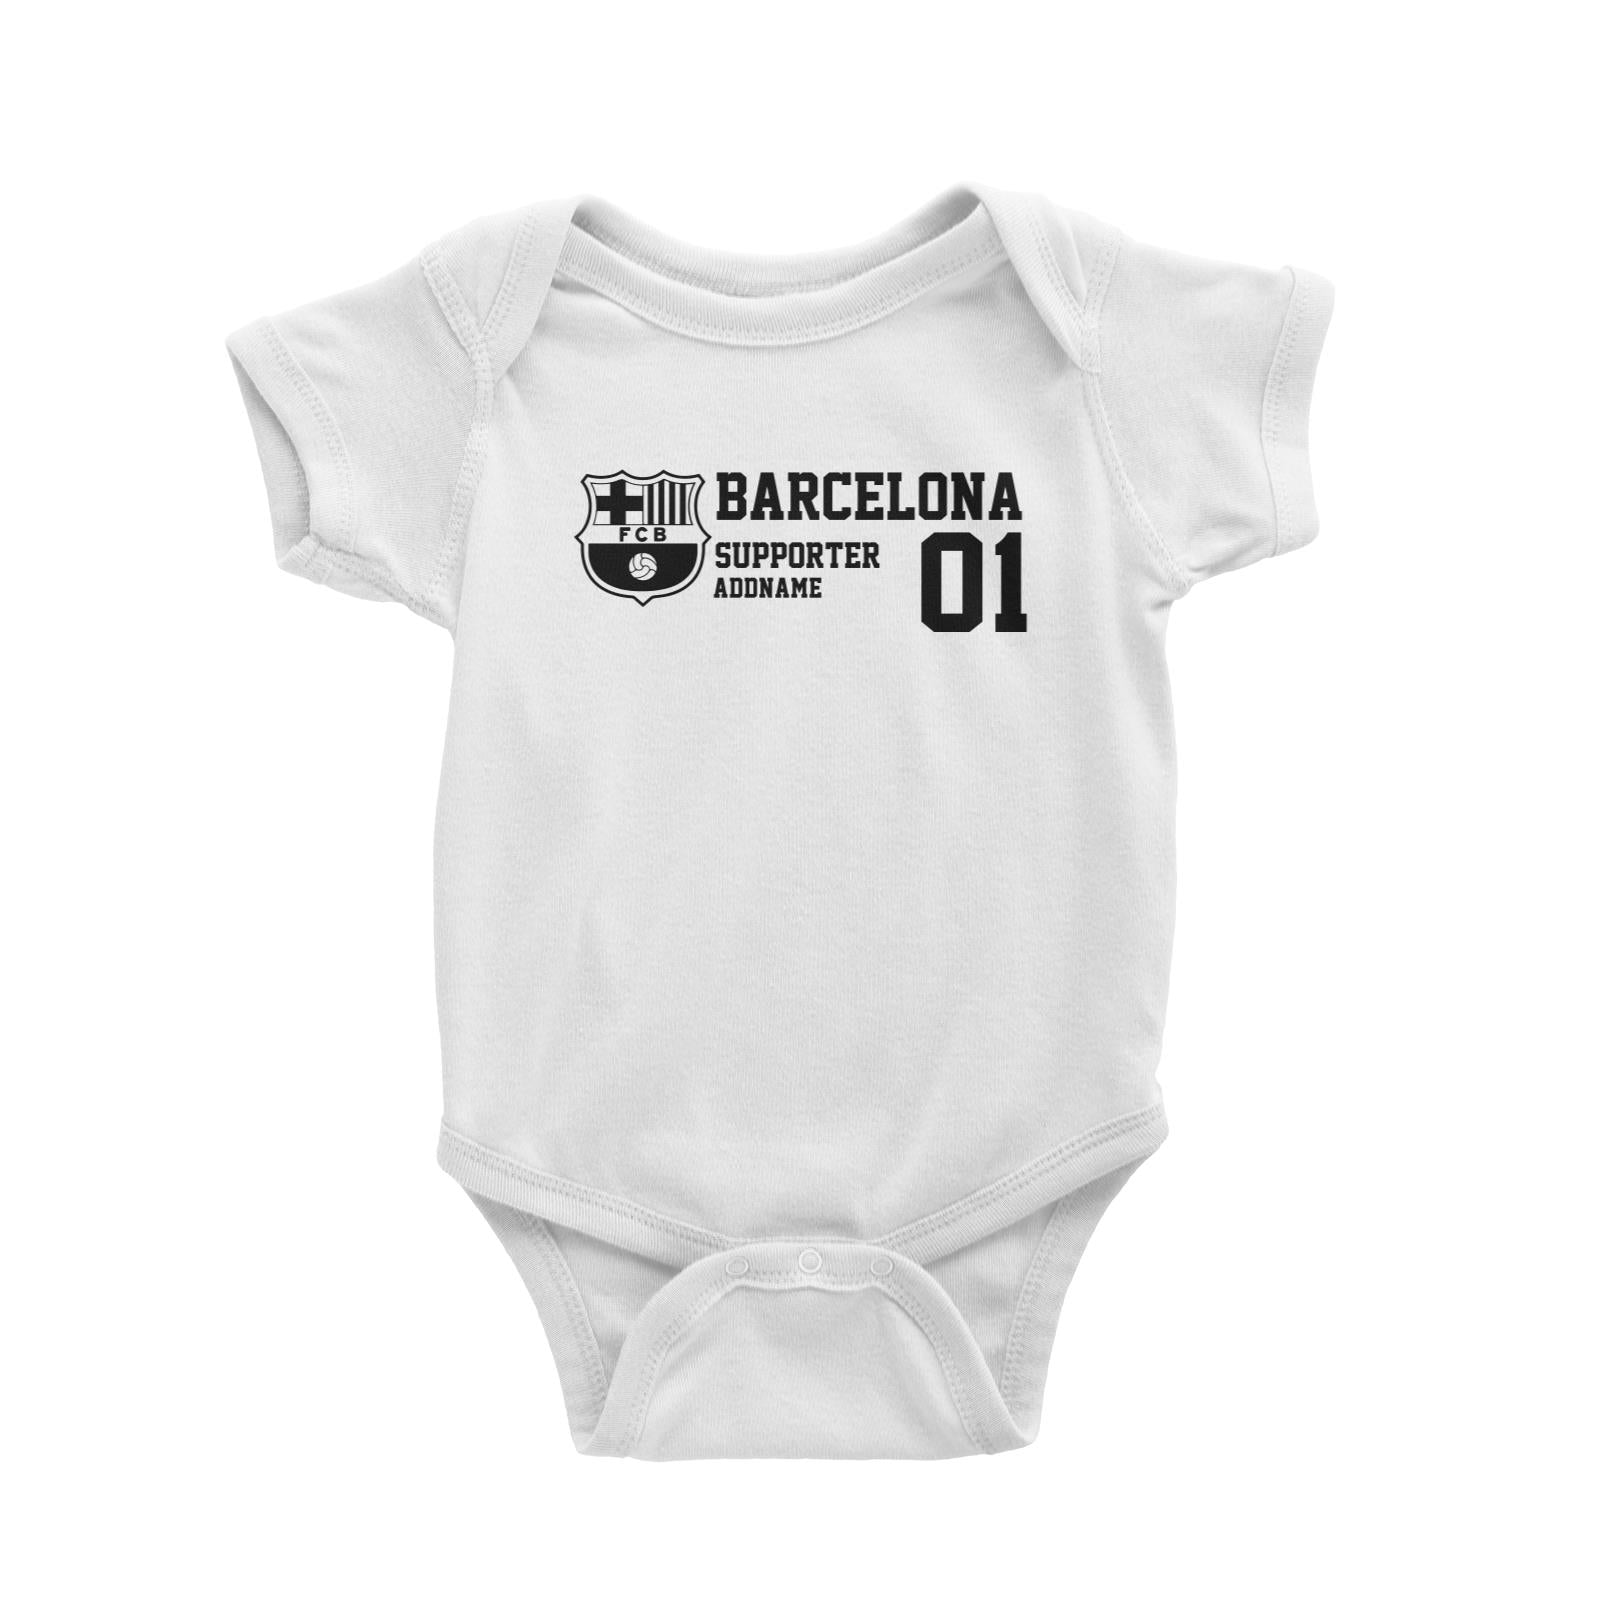 Barcelona Football Supporter Addname Baby Romper